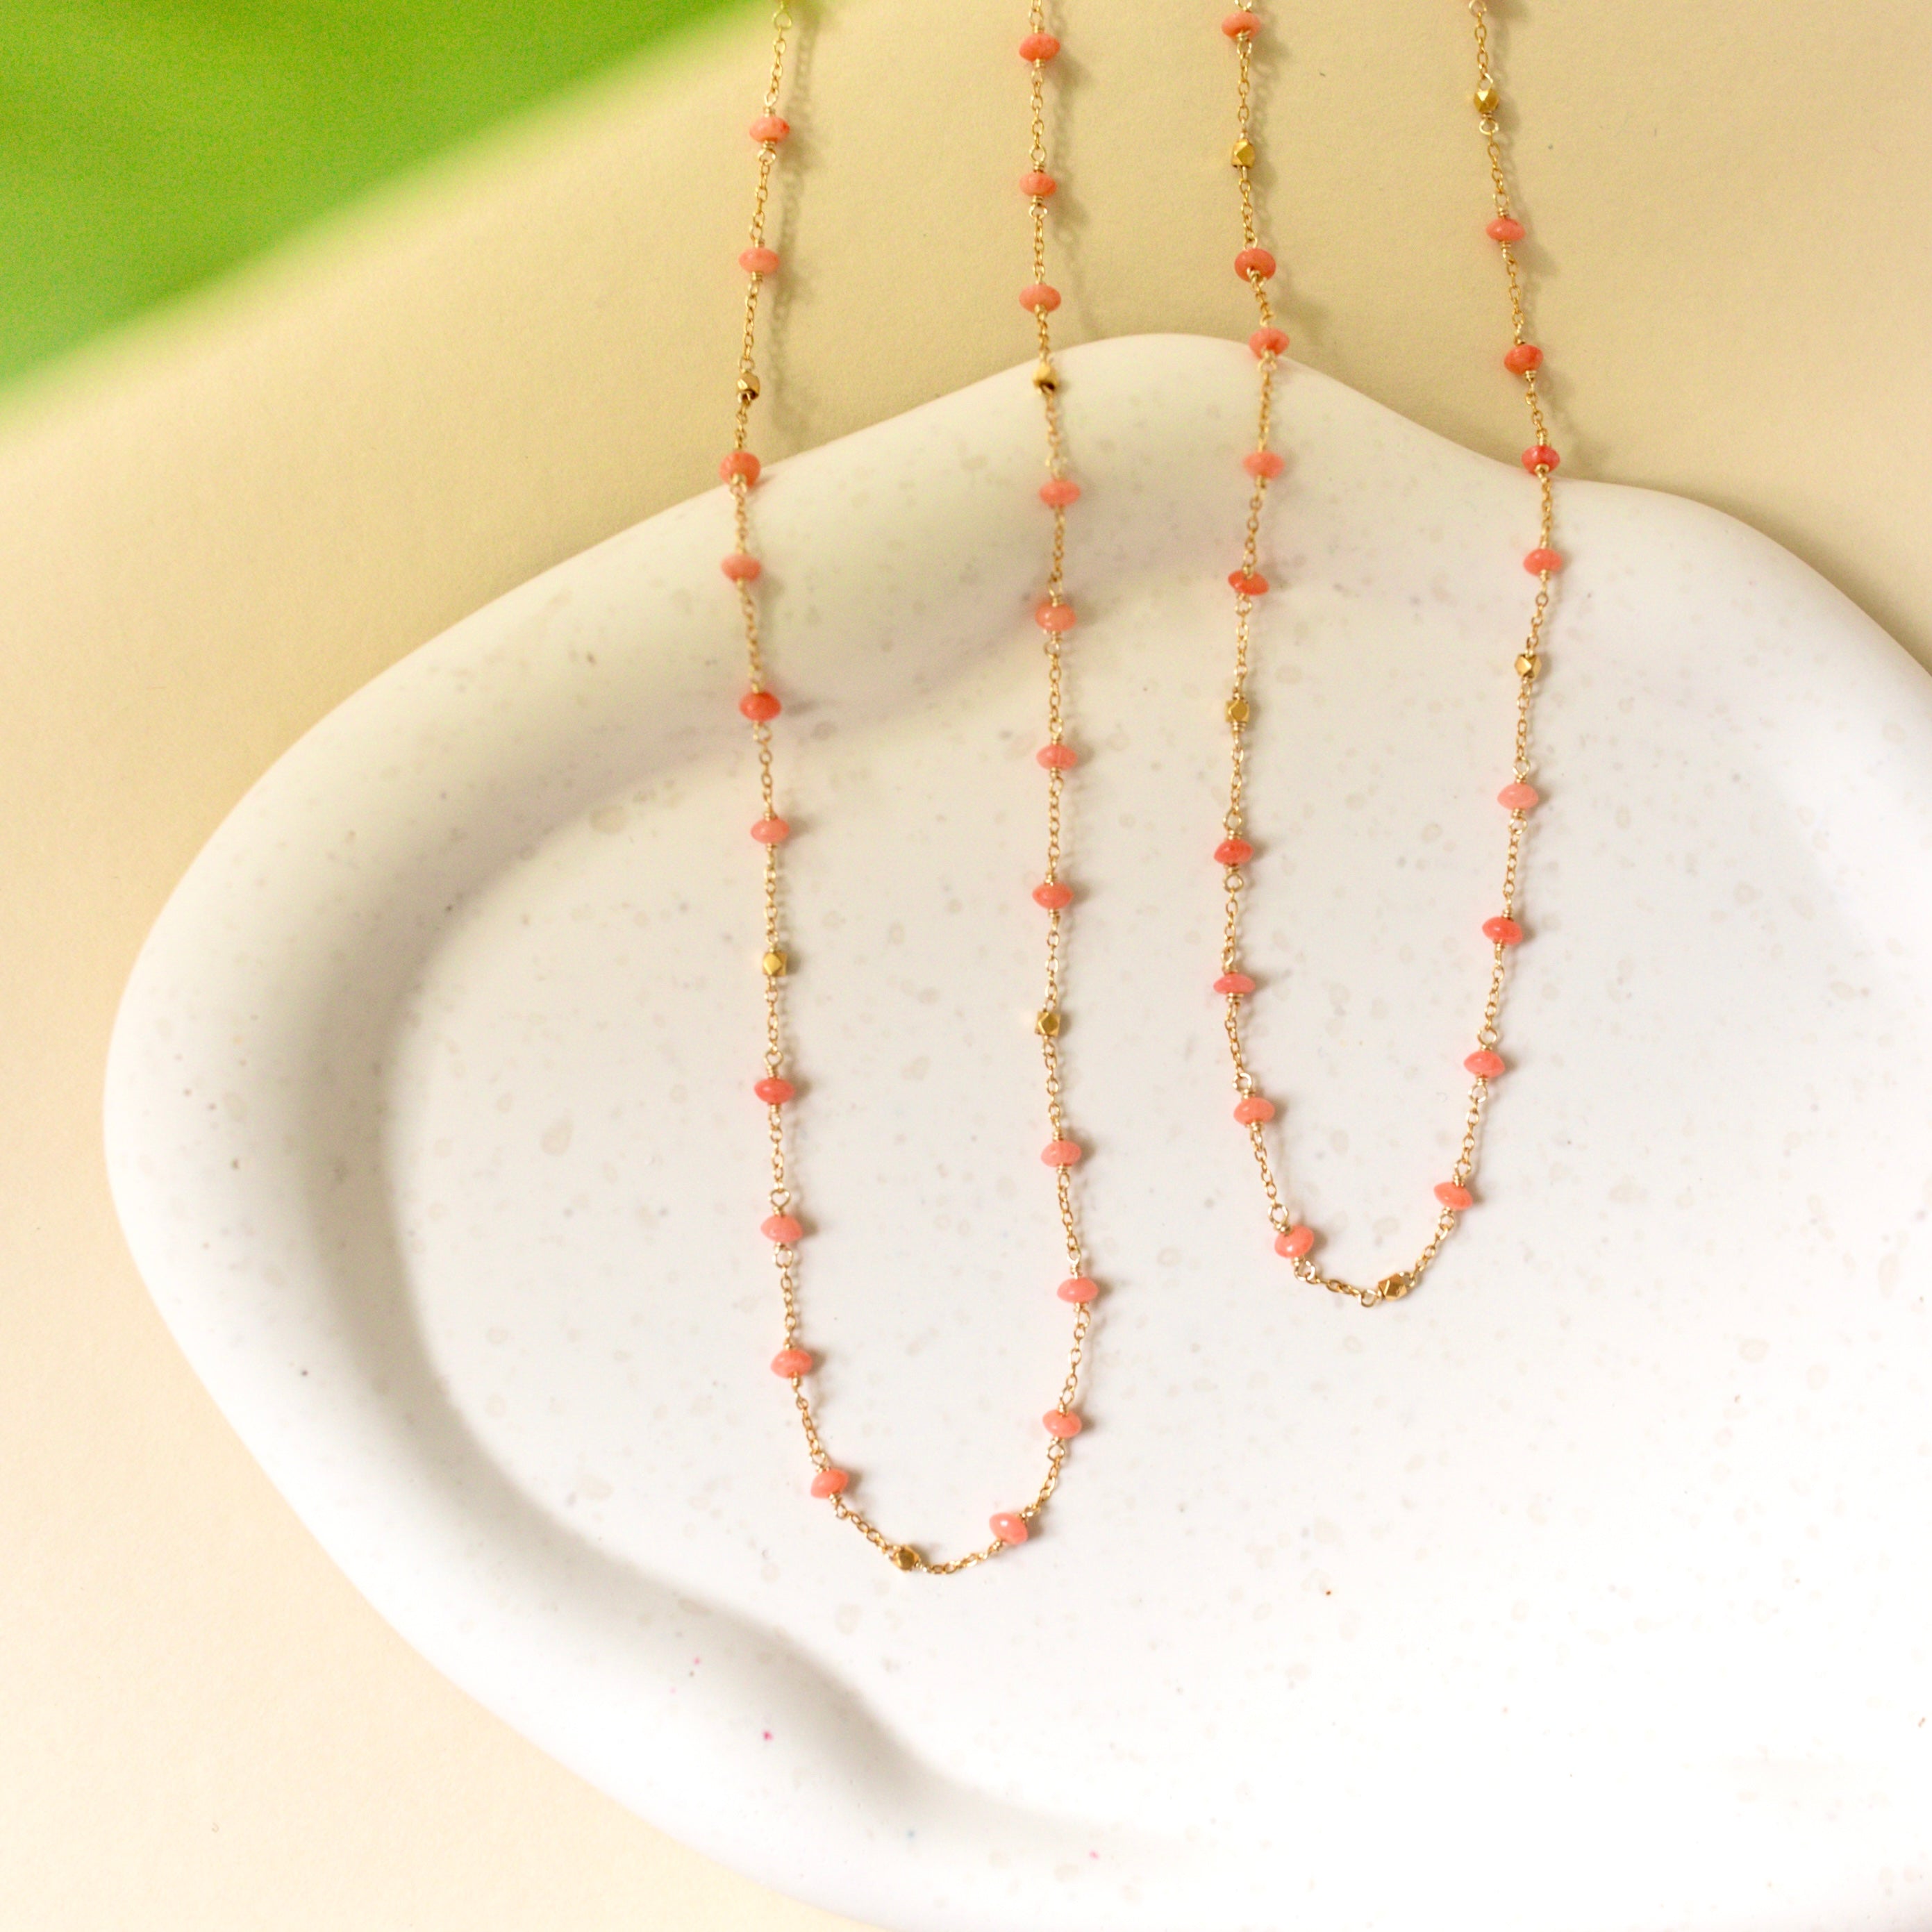 Coral Gemstones Beaded on an Adjustable Gold Chain